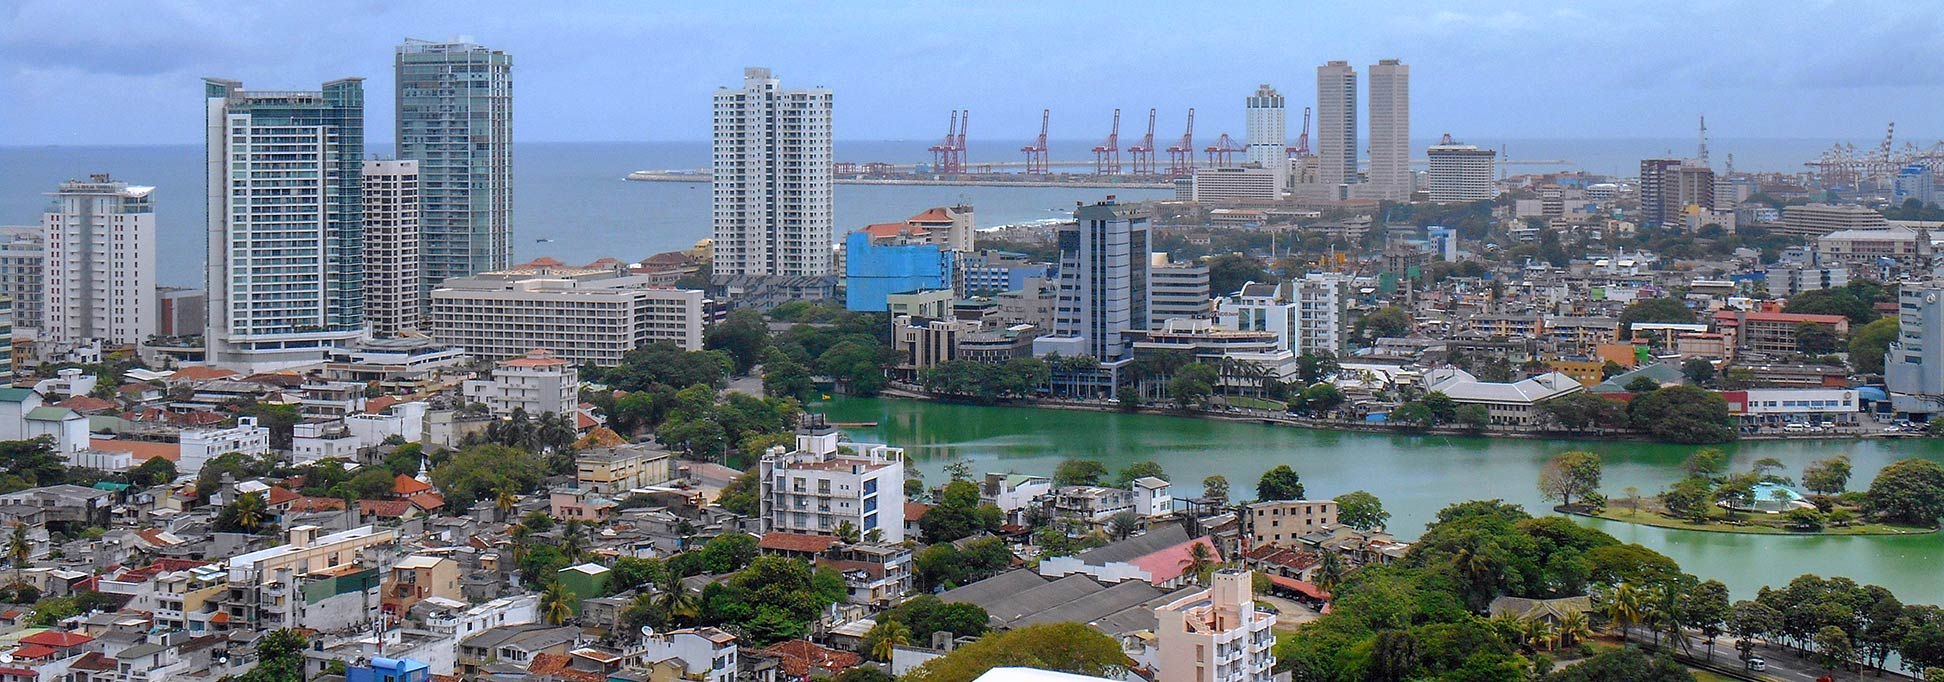 Central Colombo with Beira Lake in Sri Lanka